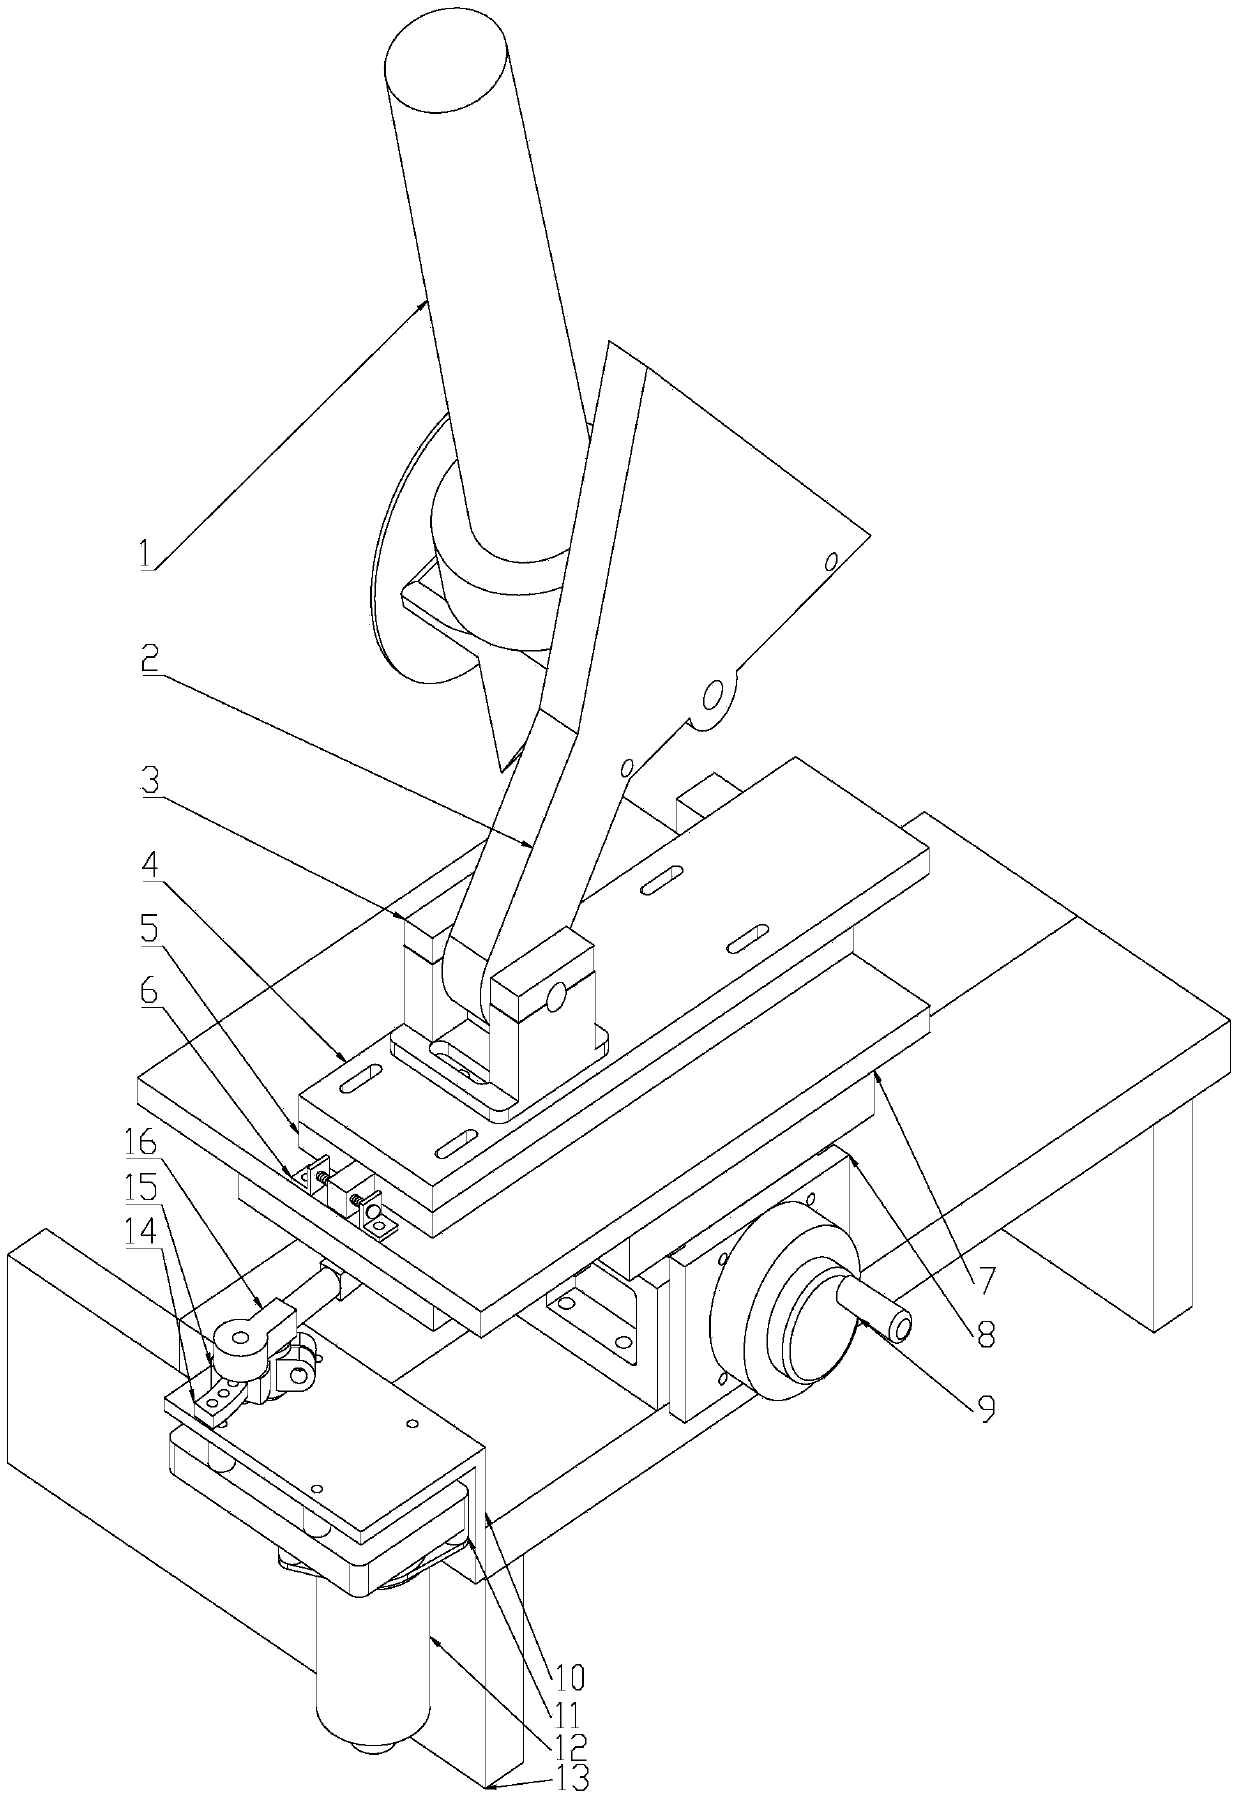 Angle grinder adjusting rack capable of being installed on machine tool